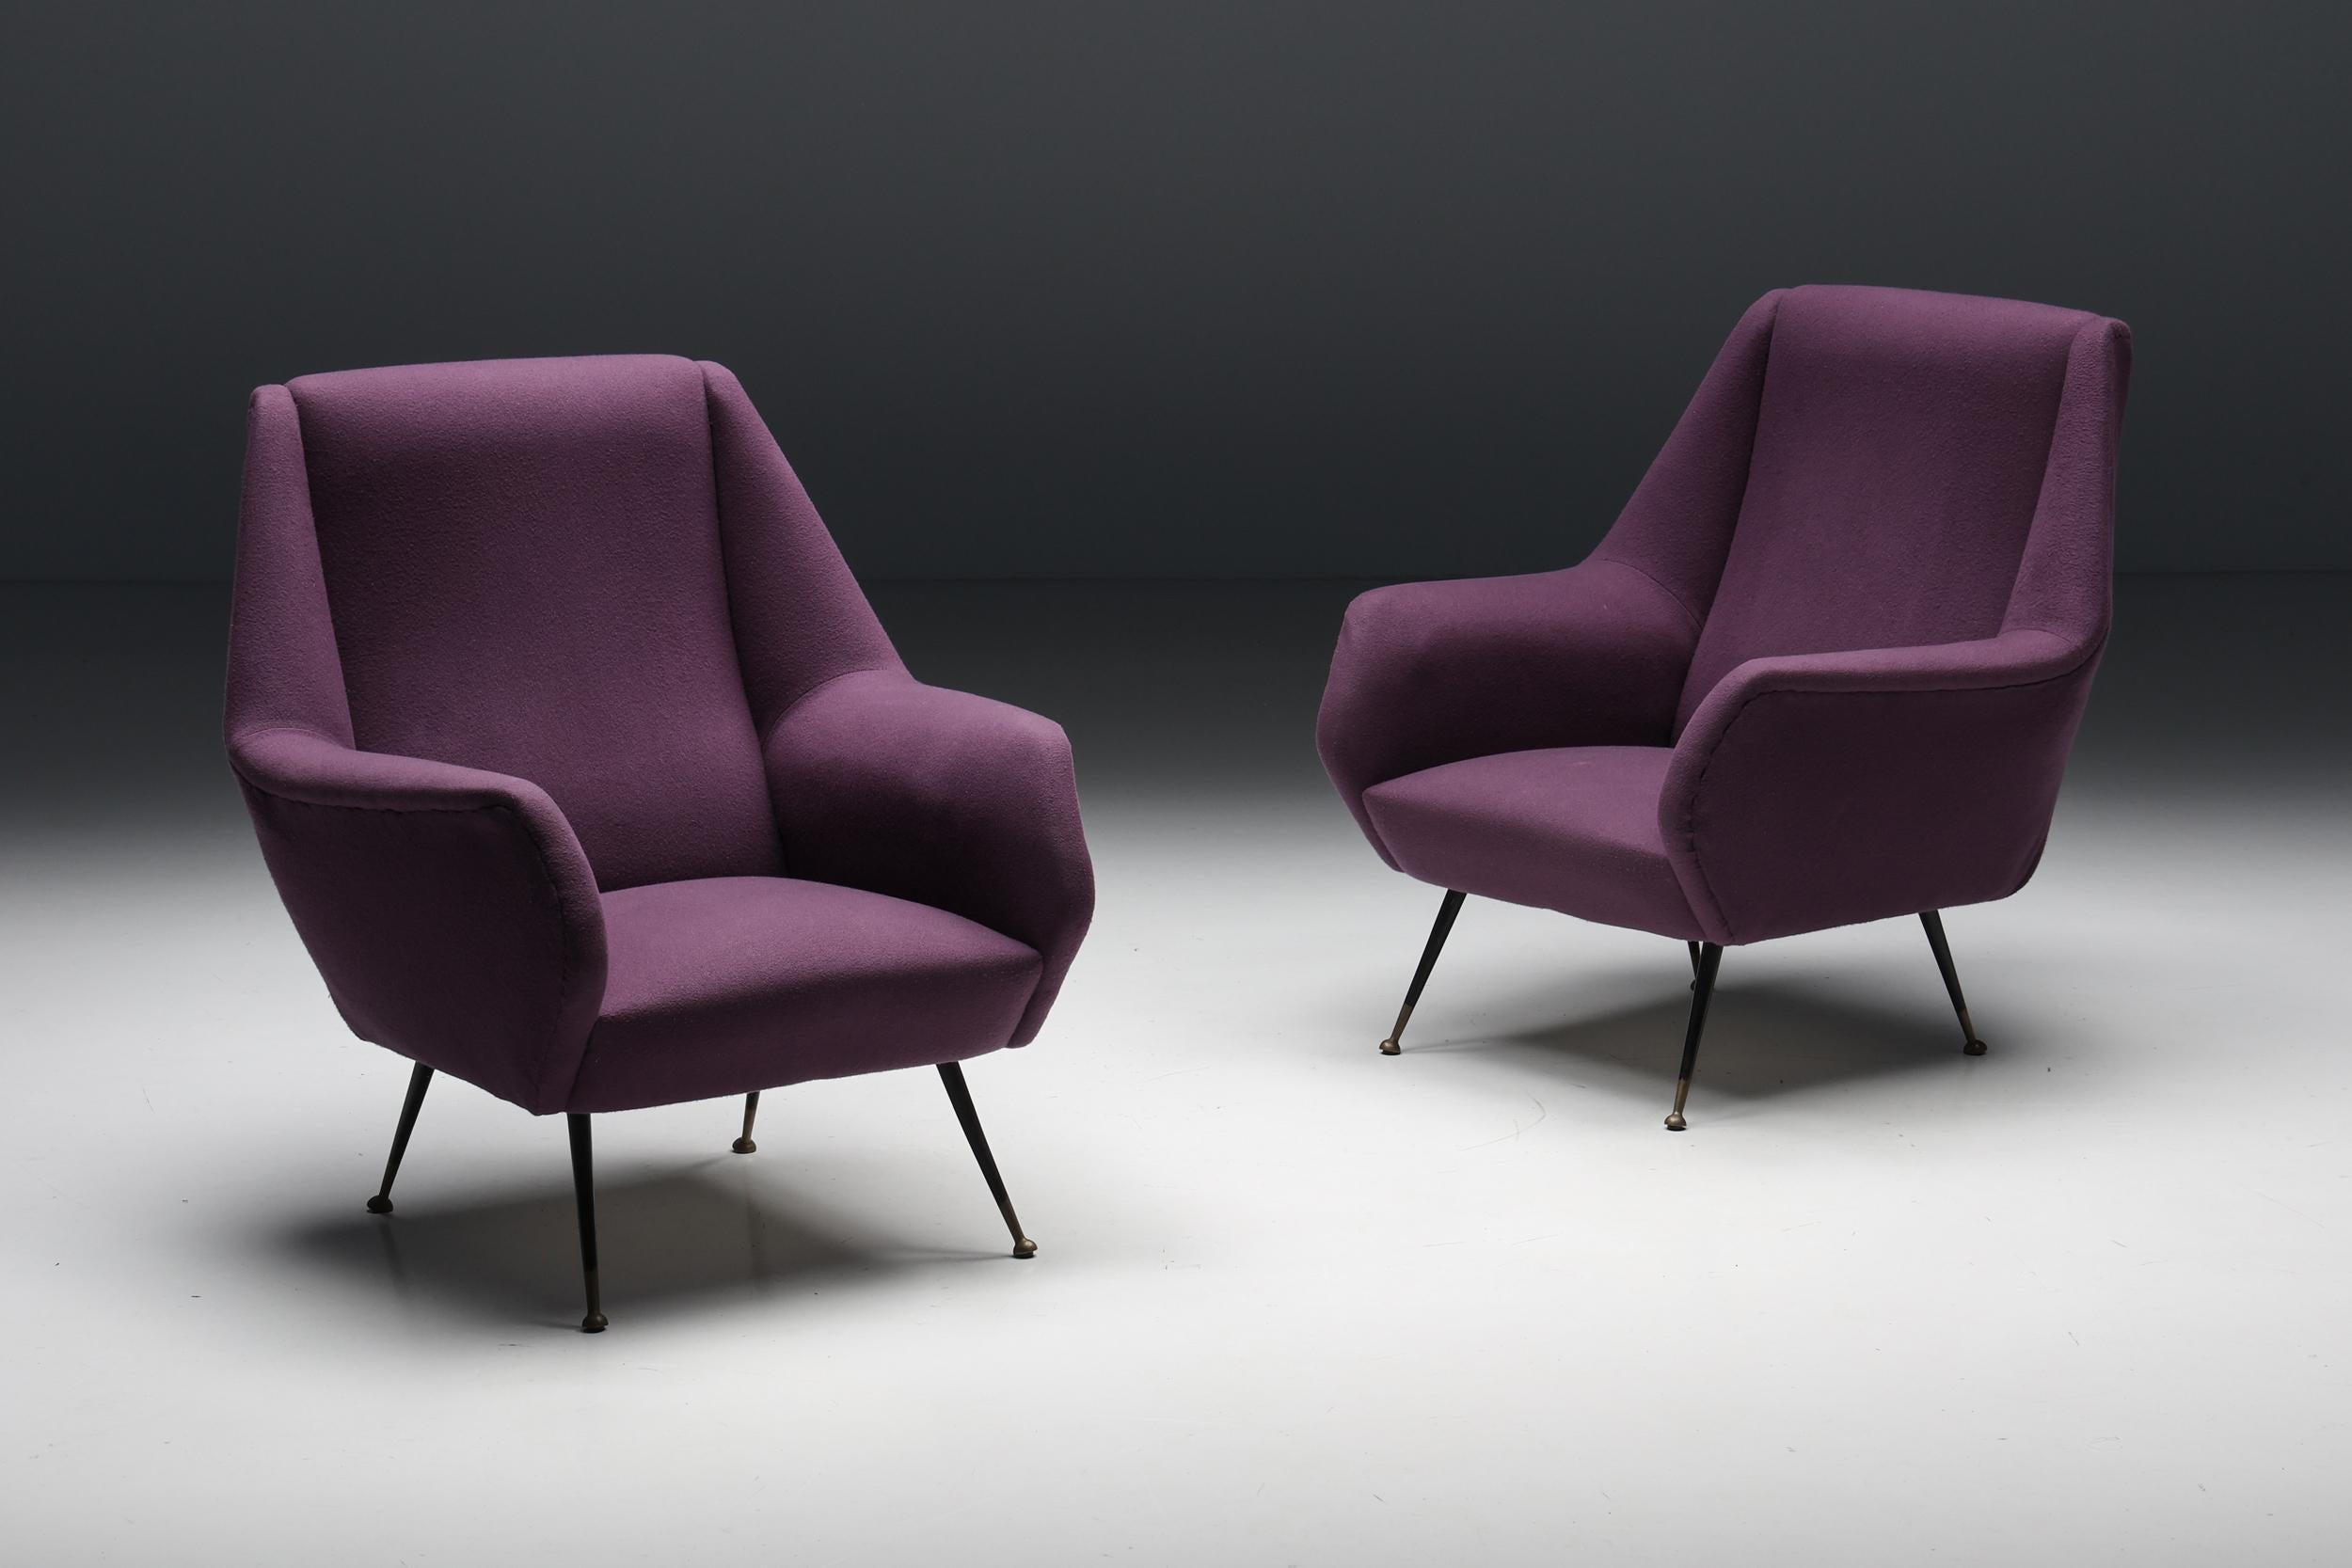 Italian pair of armchairs, by Ico Parisi, purple fabric.
Black metal legs which end on brass round feet.
1950s Italian chic lounge chairs which would fit well in an eclectic Hollywood Regency inspired interior.
 